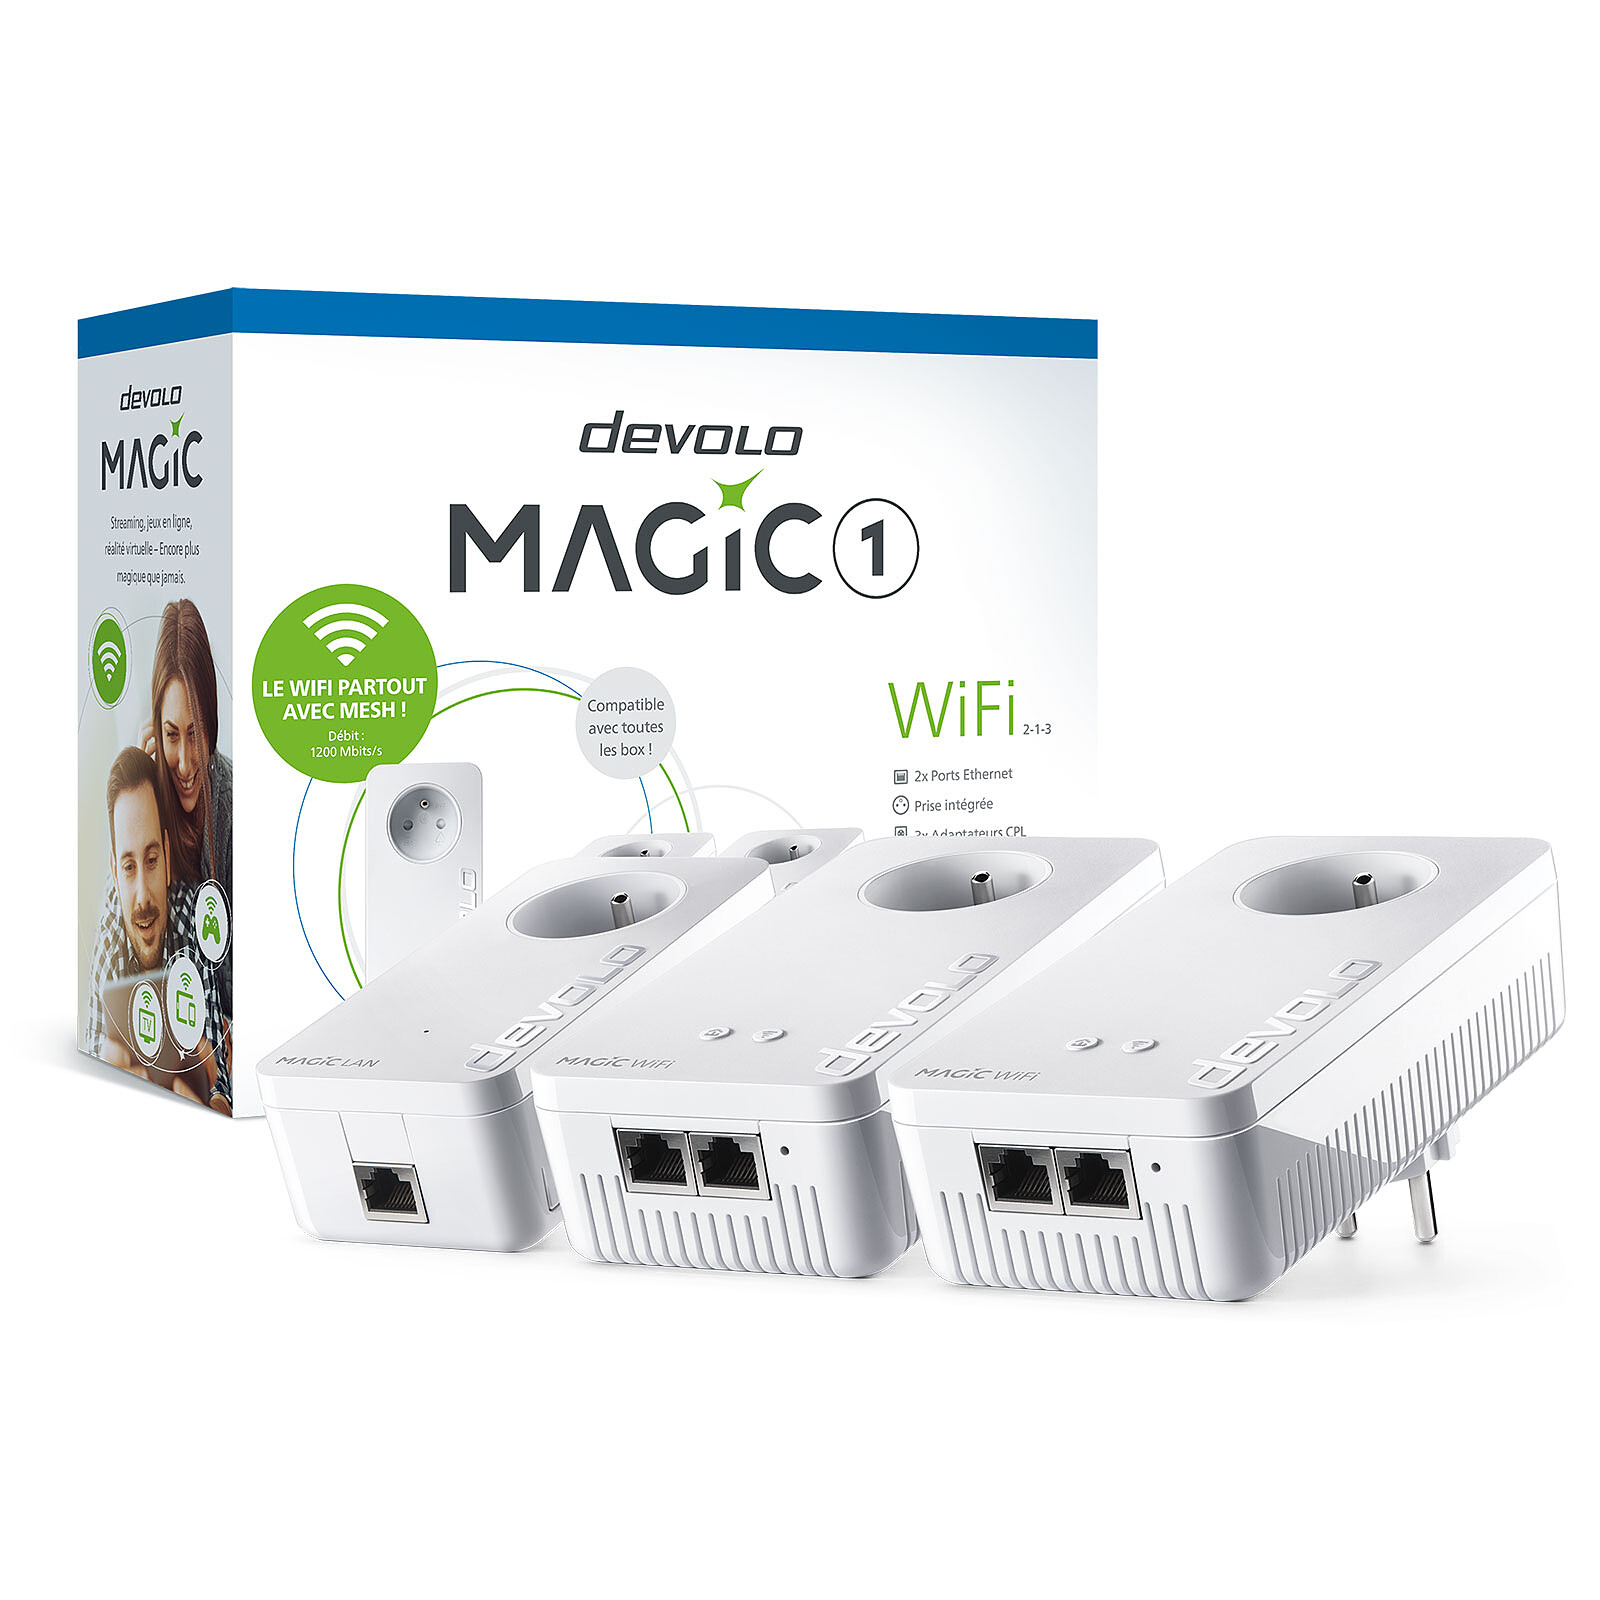 Magic 1 WiFi Powerline – Mesh Wi-Fi from the electrical socket